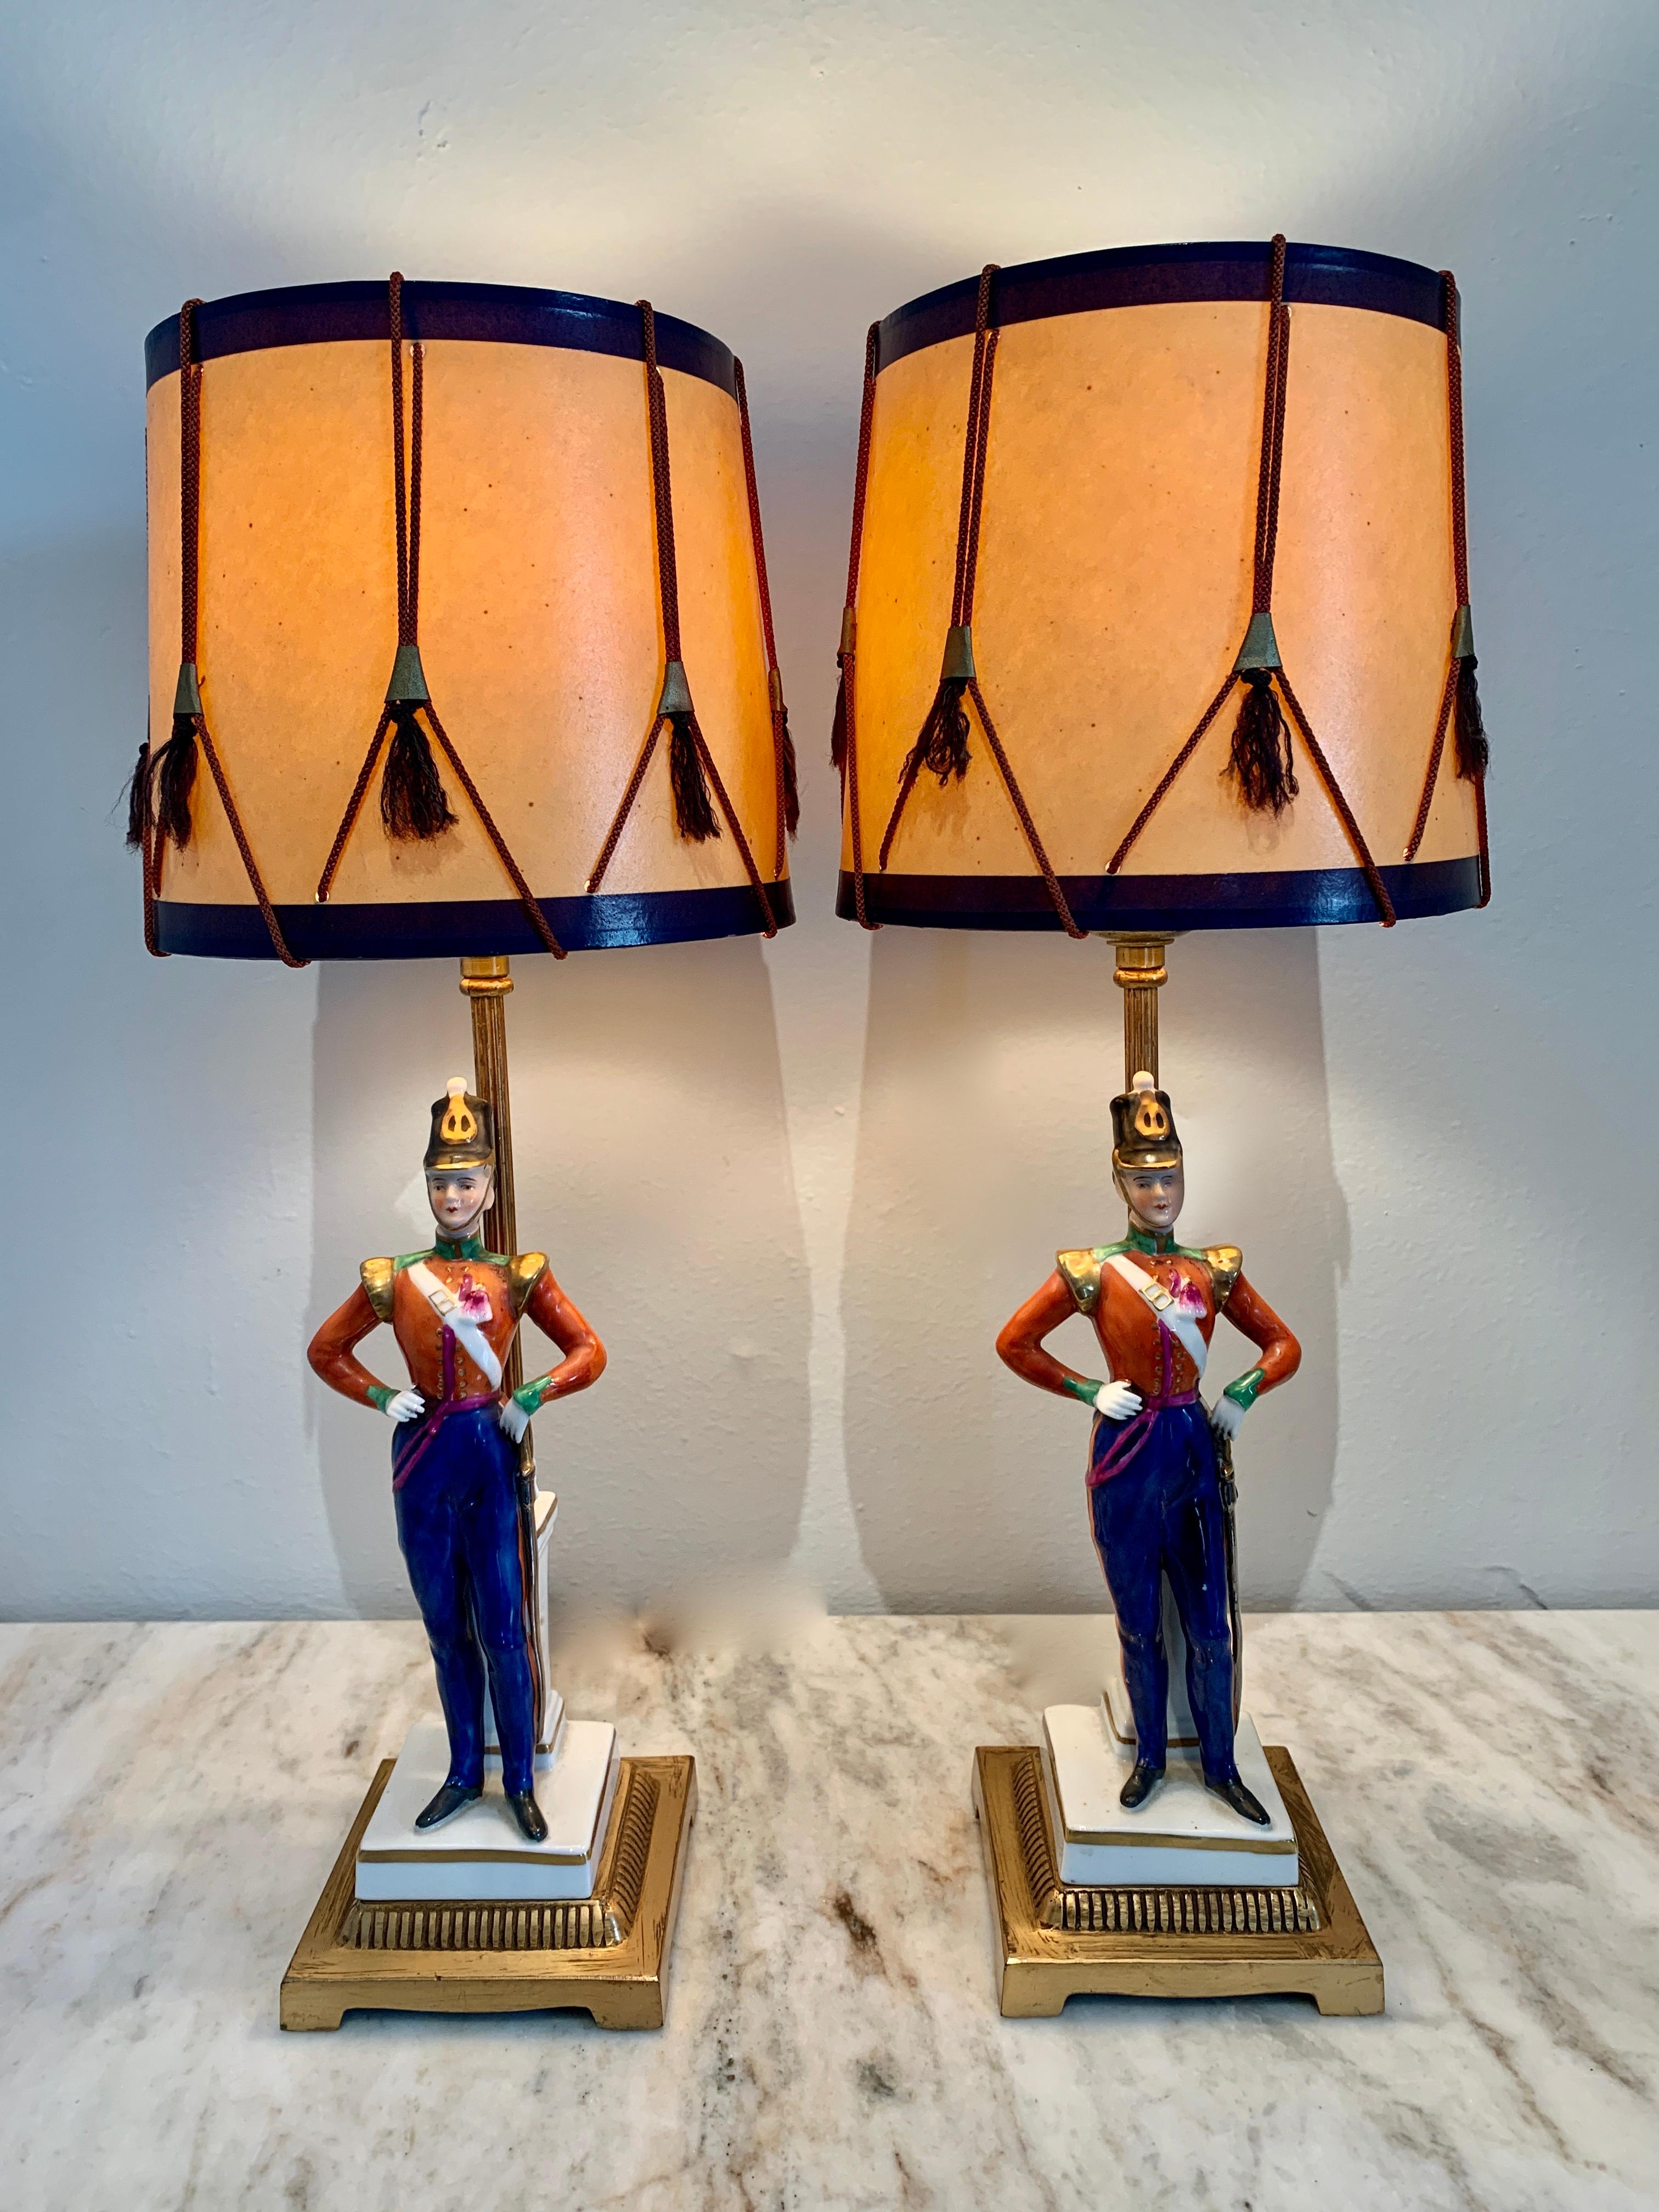 Pair of German Porcelain soldier lamps on bronze mounts with drum shades

An unique and rare pair of adorable soldiers well suited for any prestigious office or most definitely the Childs room. The porcelain is in very good condition with no